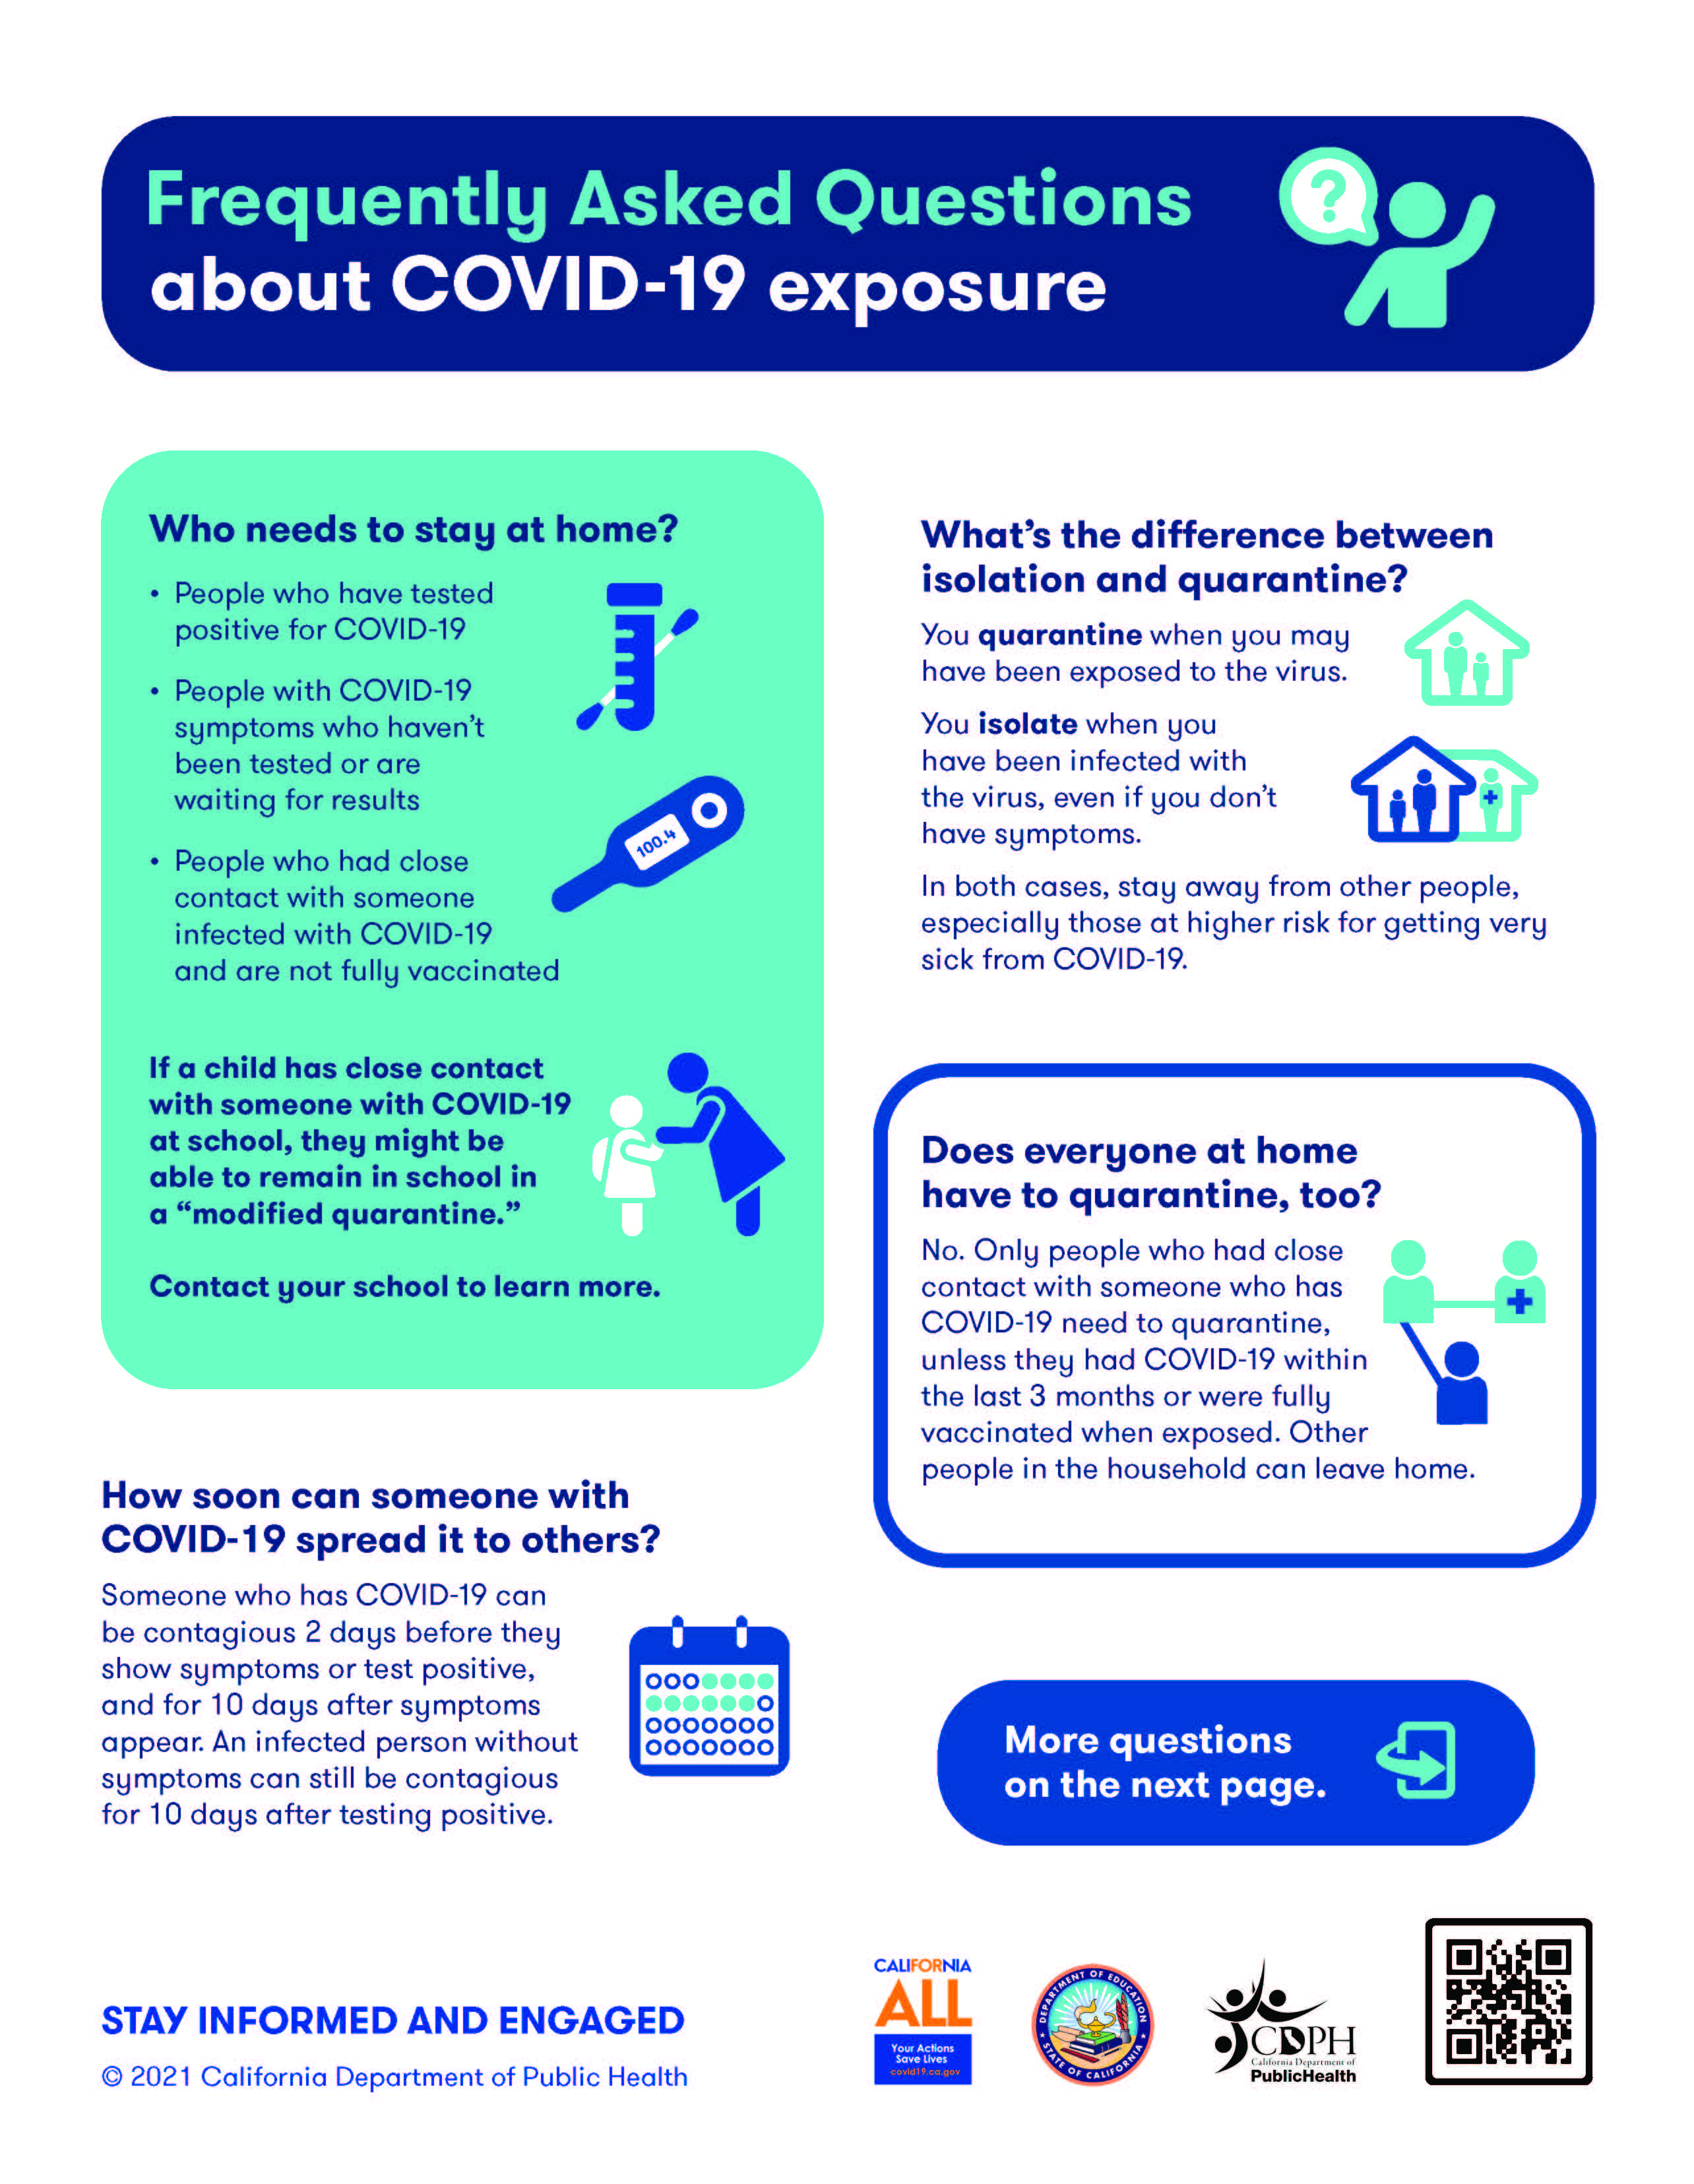 Frequently Asked Questions about COVID-19 Exposure